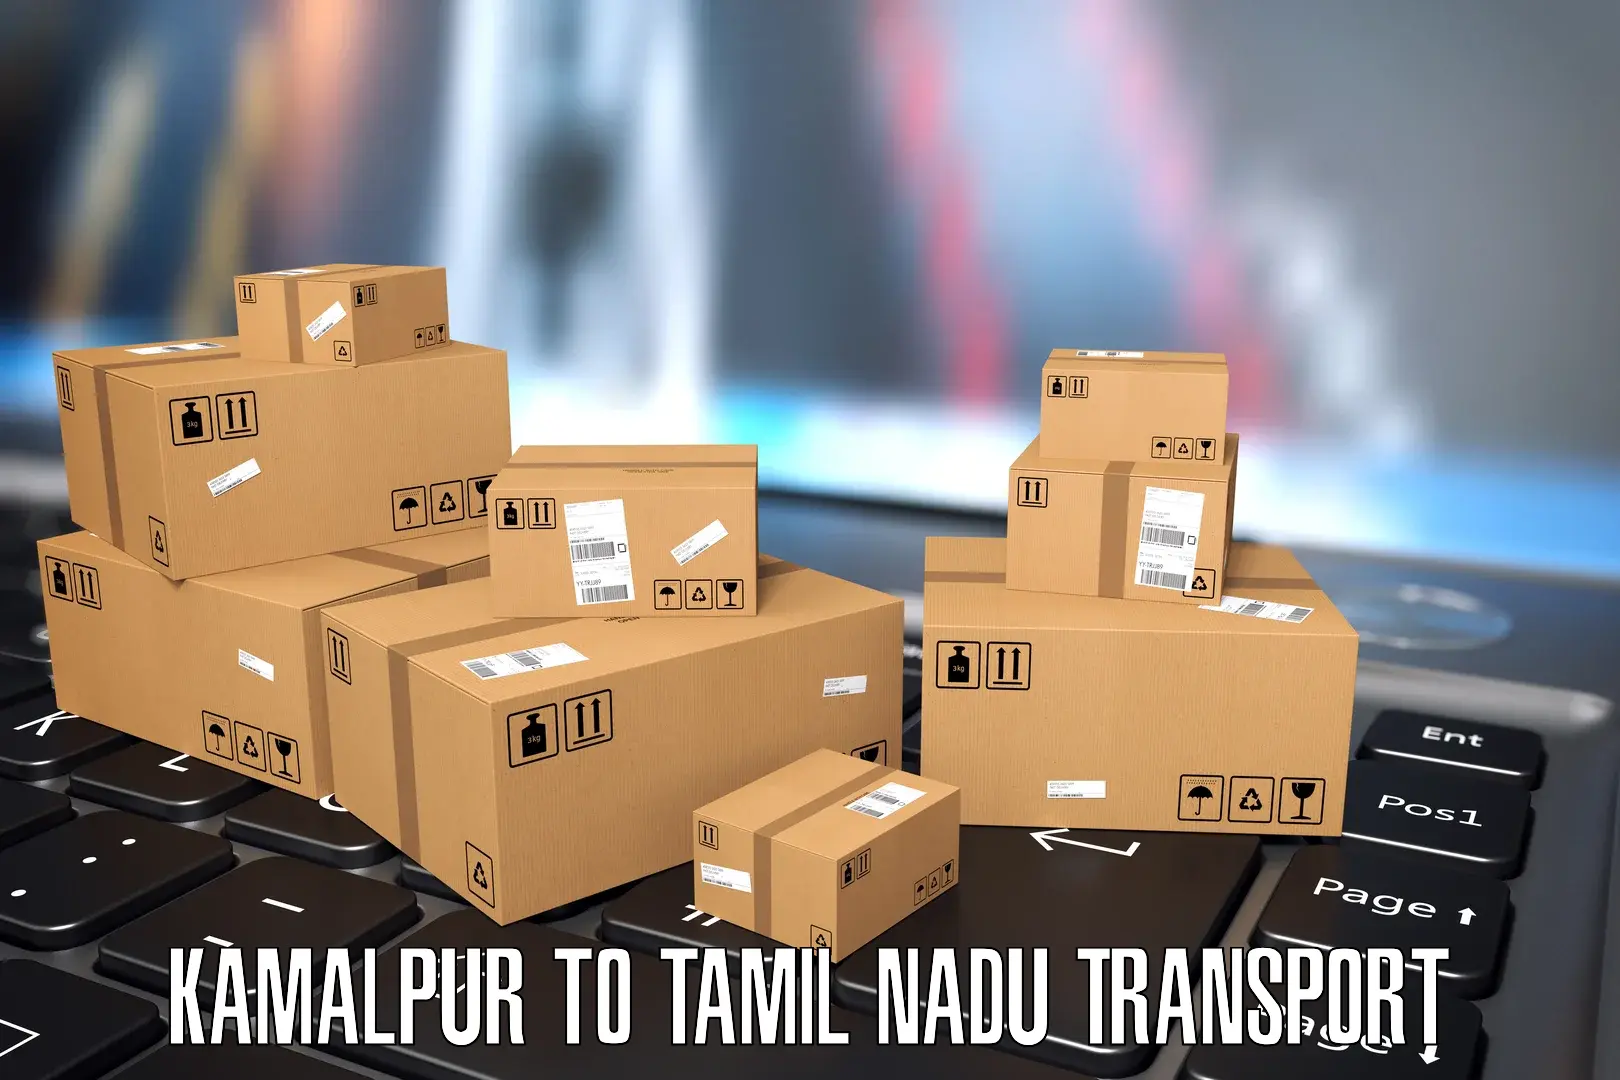 Parcel transport services Kamalpur to Shanmugha Arts Science Technology and Research Academy Thanjavur